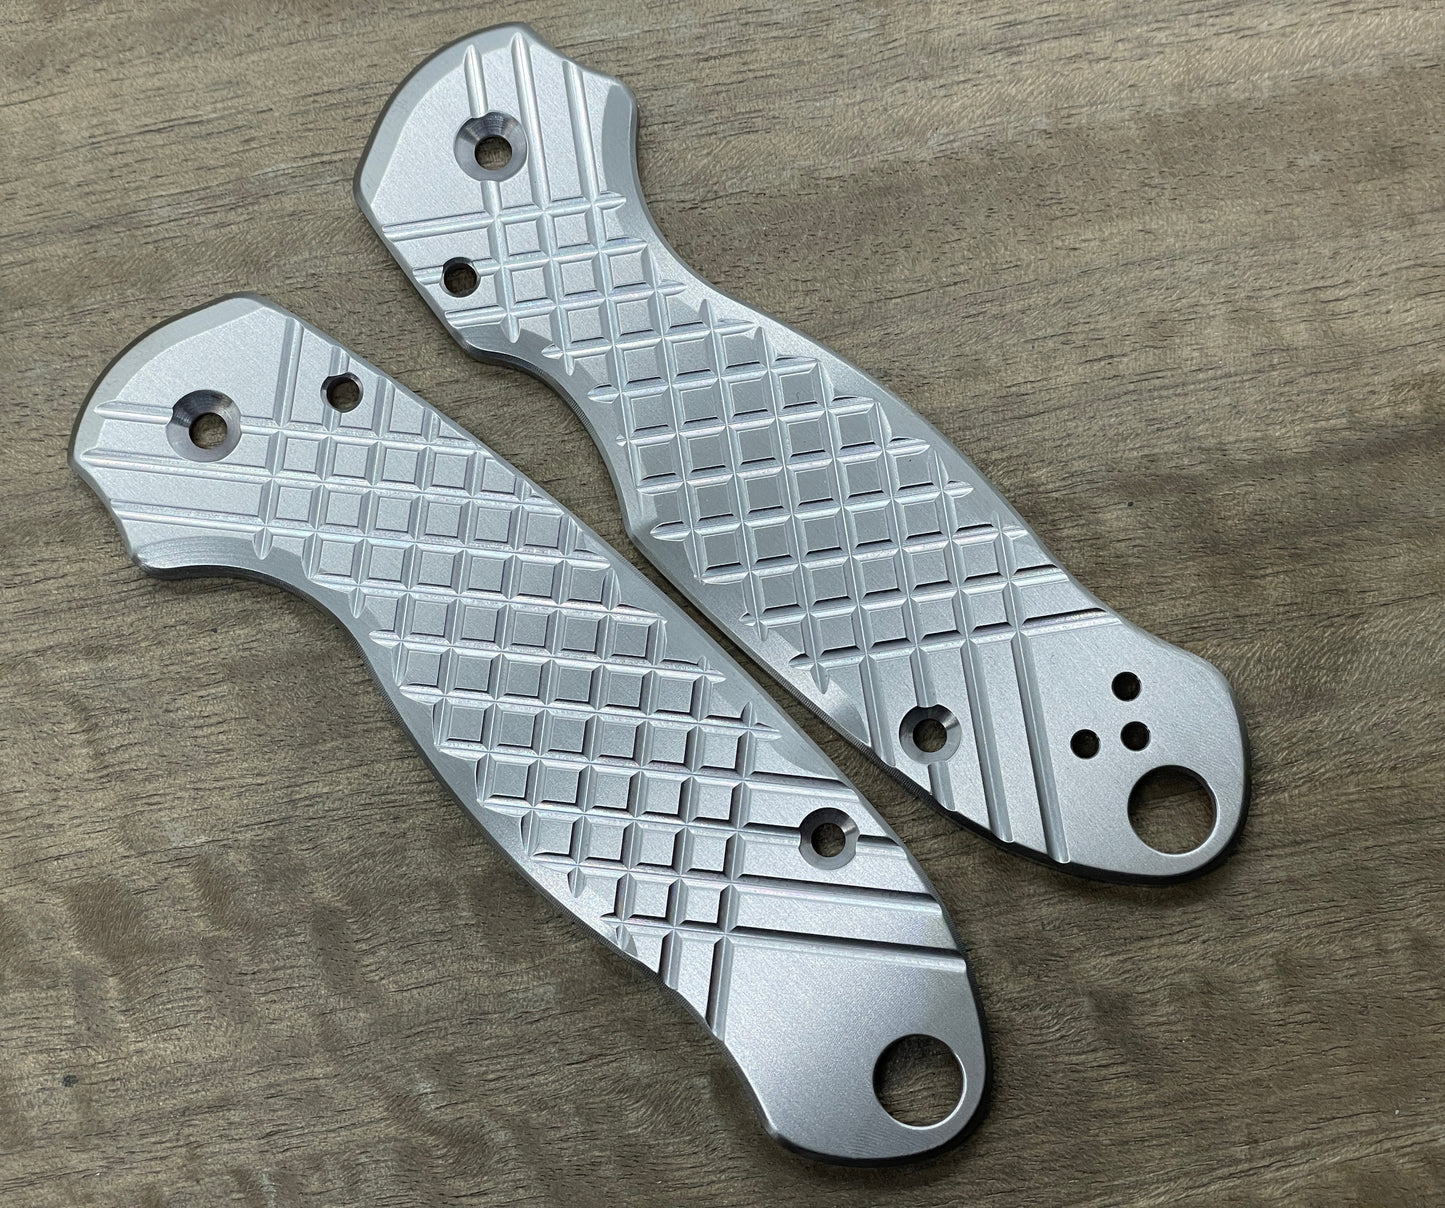 Redesigned FRAG milled Titanium scales for Spyderco Para 3